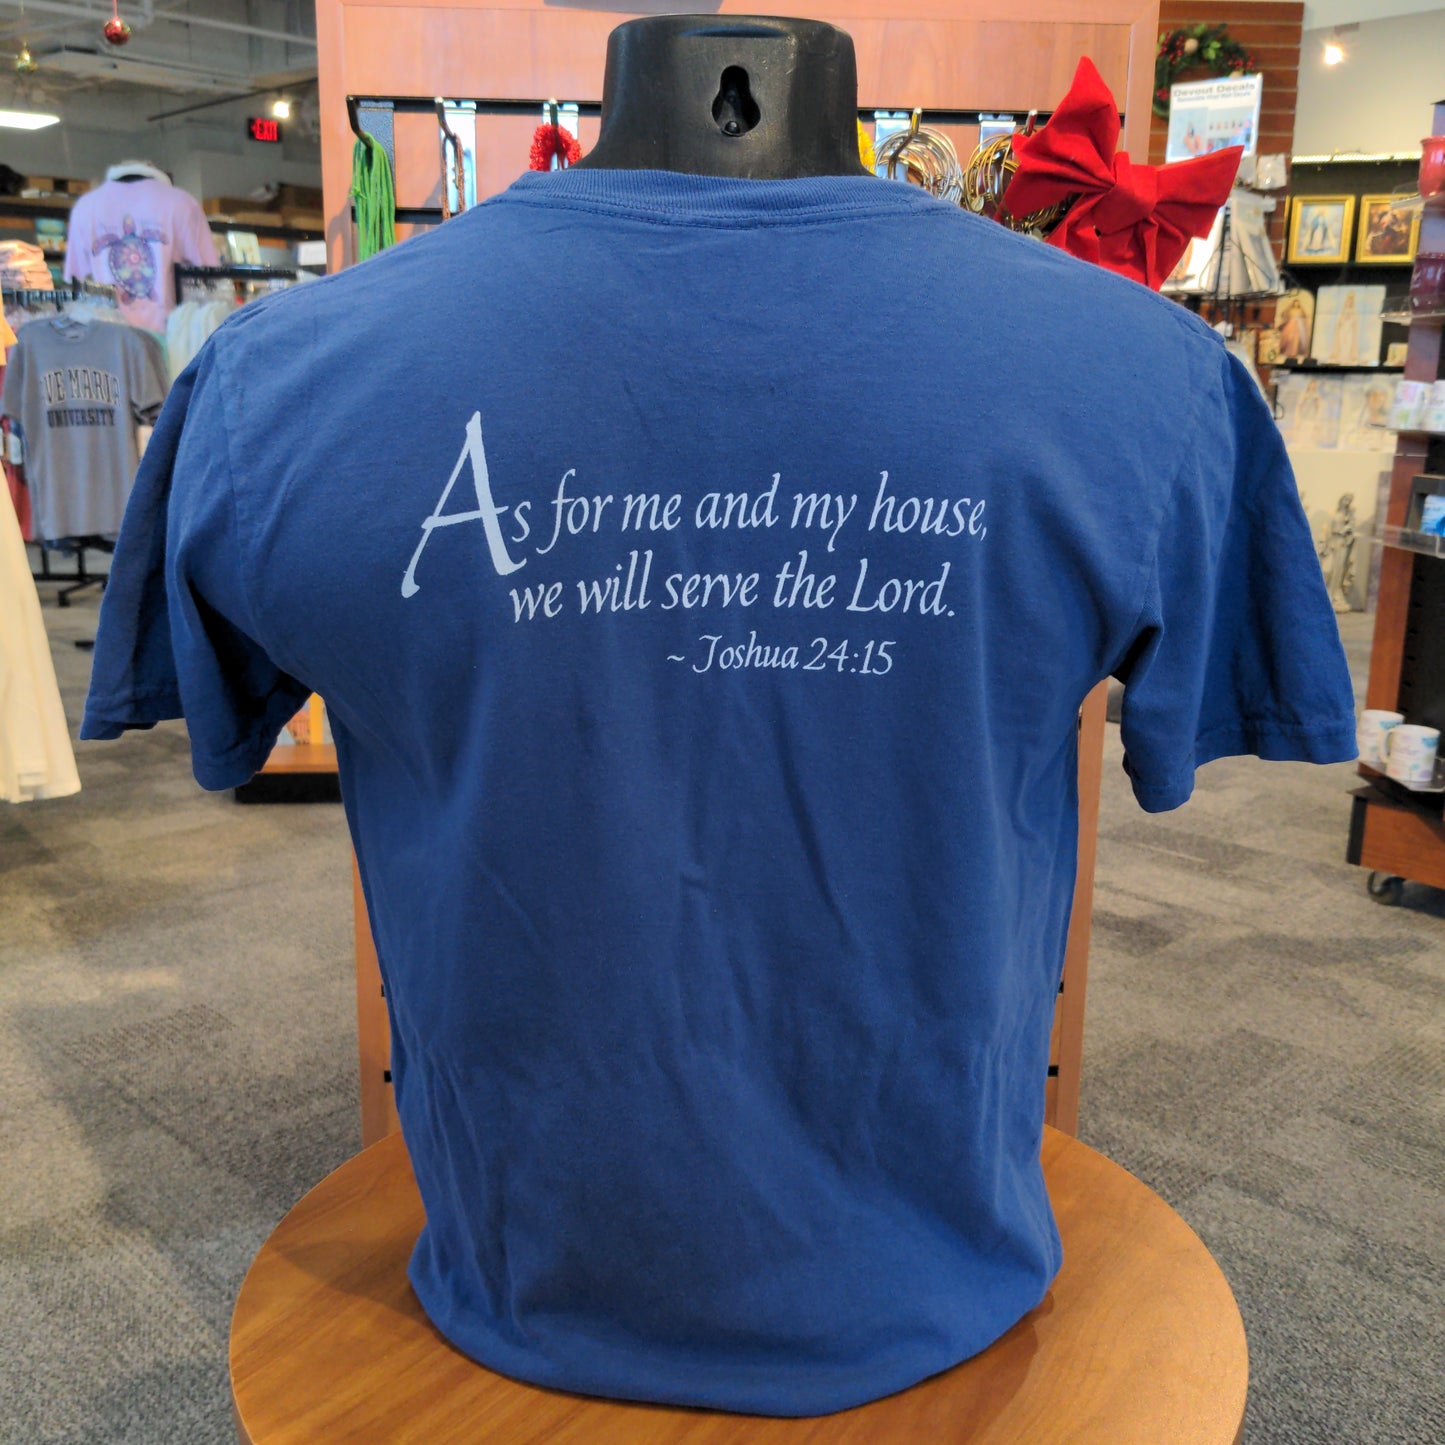 Ave Maria Florida - "As For Me and My House" Joshua 24:15 Tee